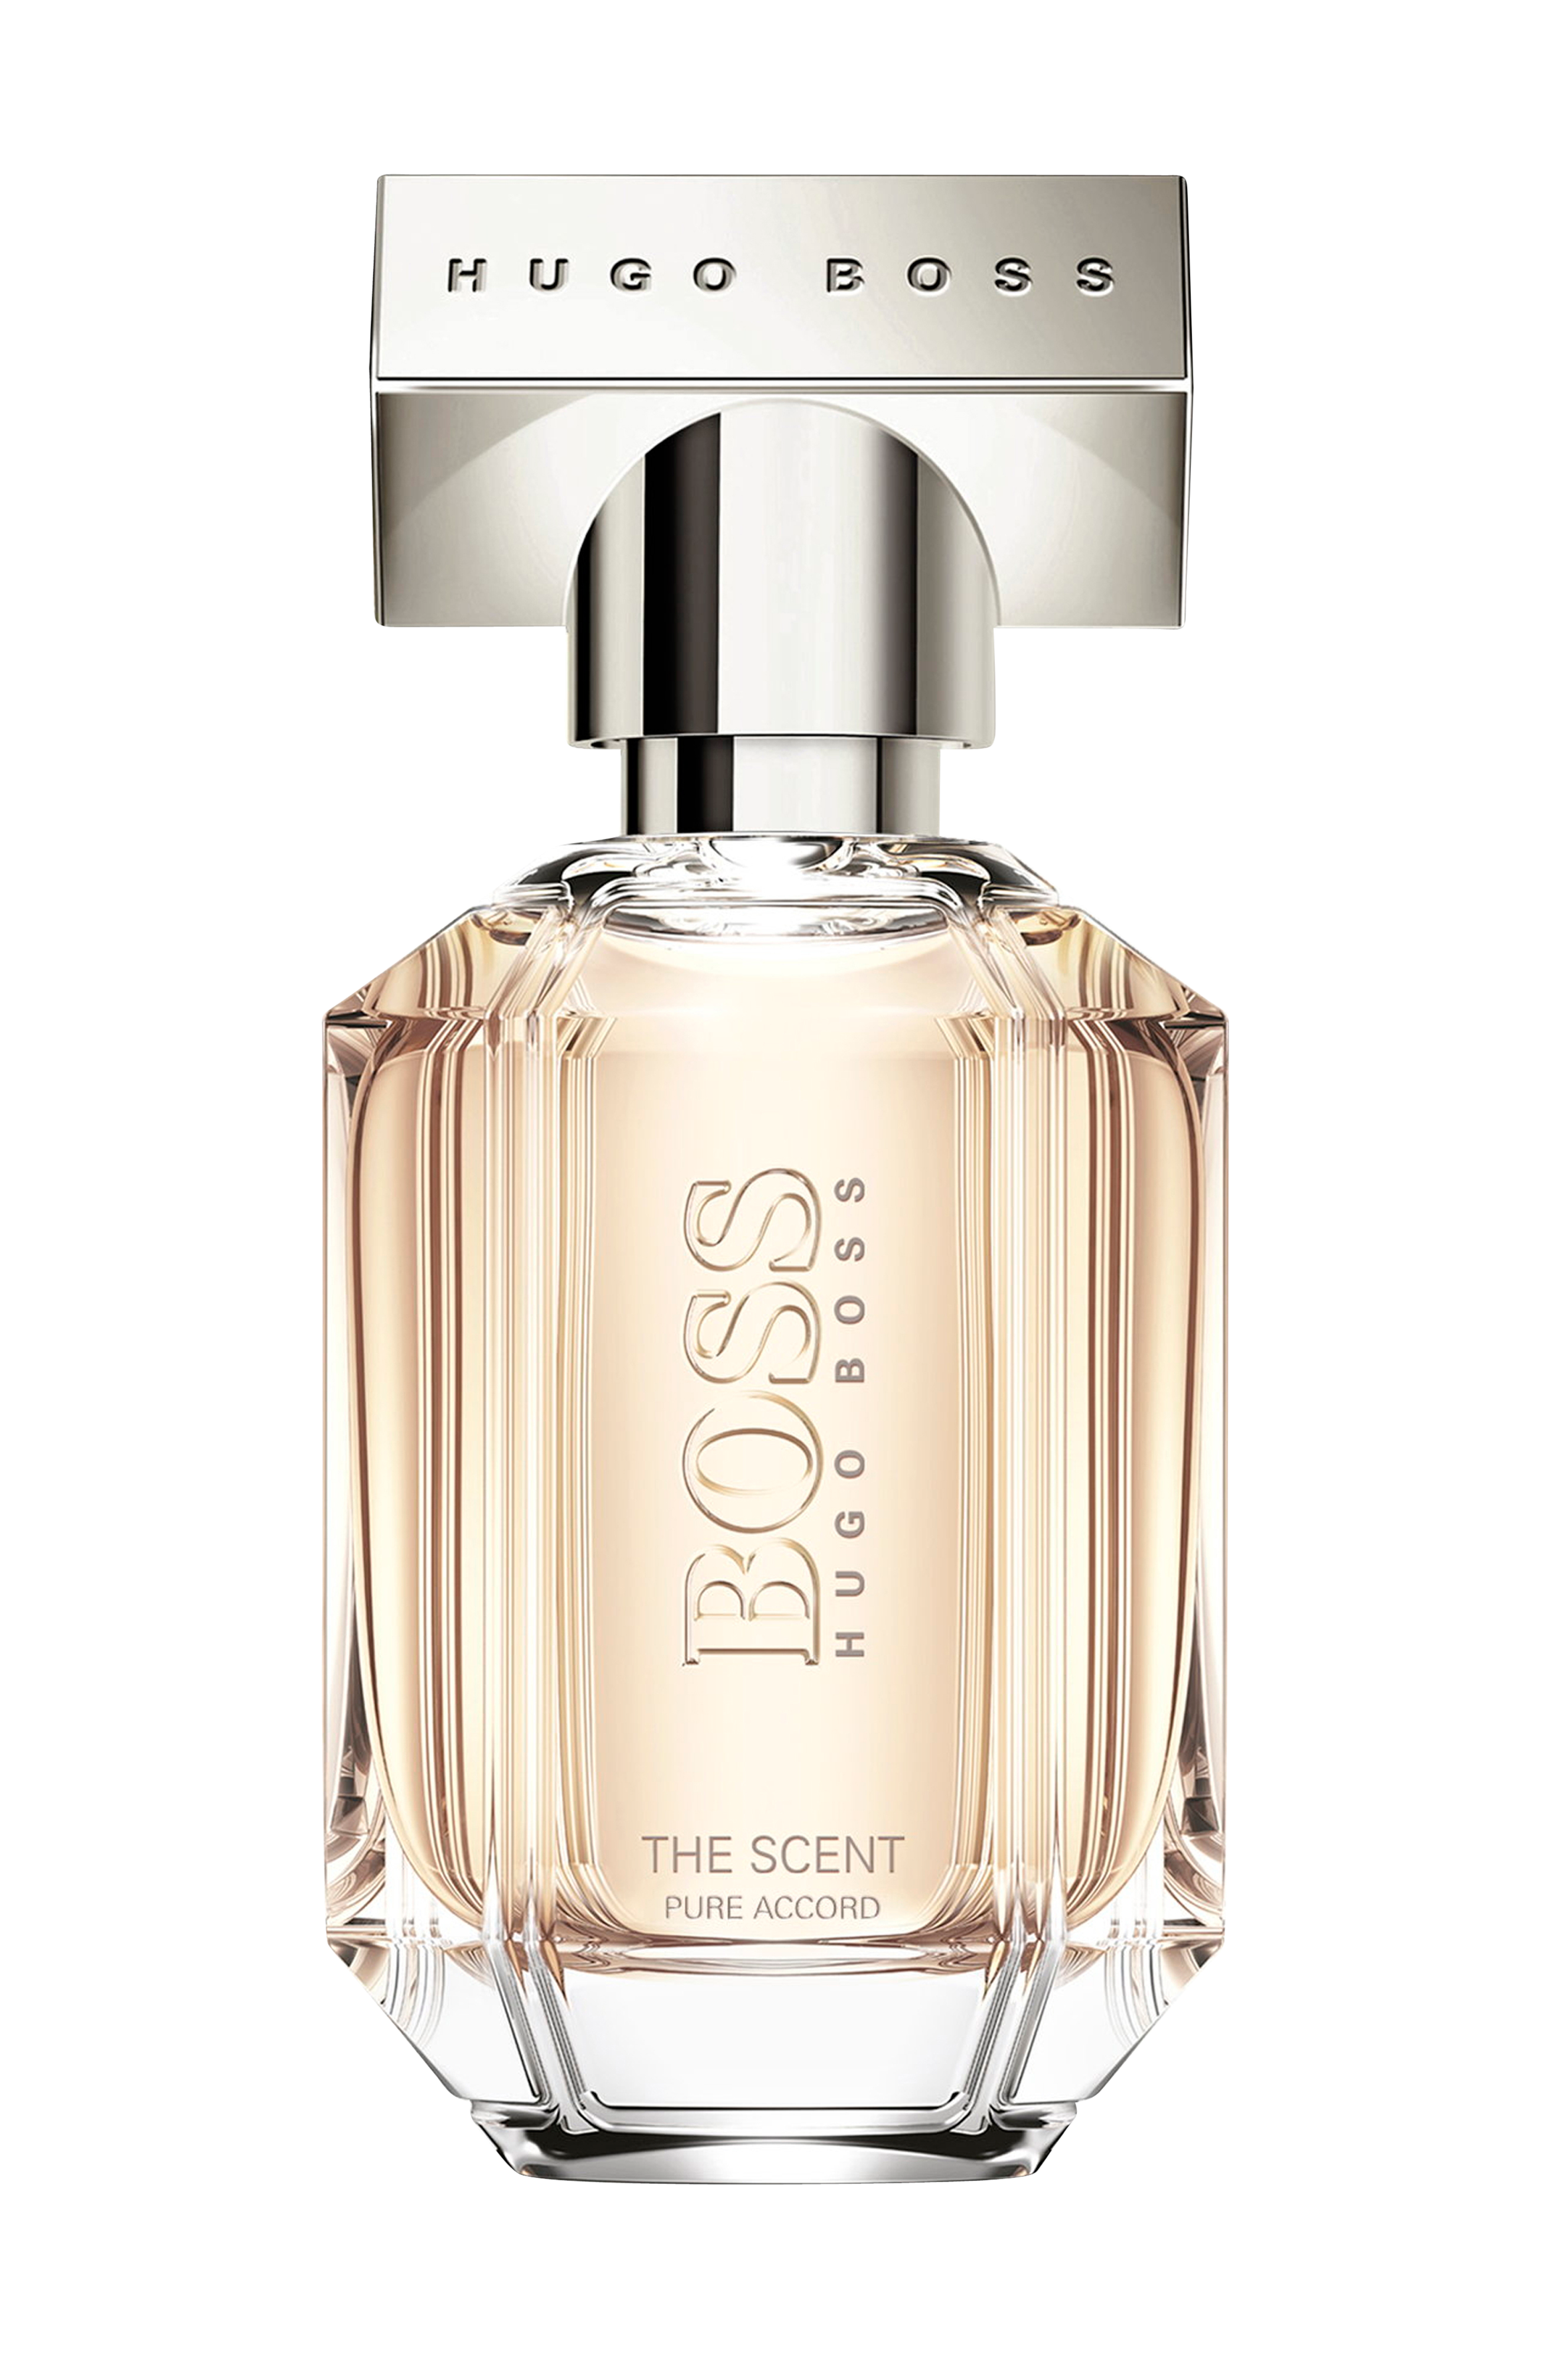 Hugo boss the scent женский. Парфюм Хьюго босс женские. Духи Boss Hugo Boss женские. Hugo Boss the Scent for her. Хьюго босс женские the Scent for her.